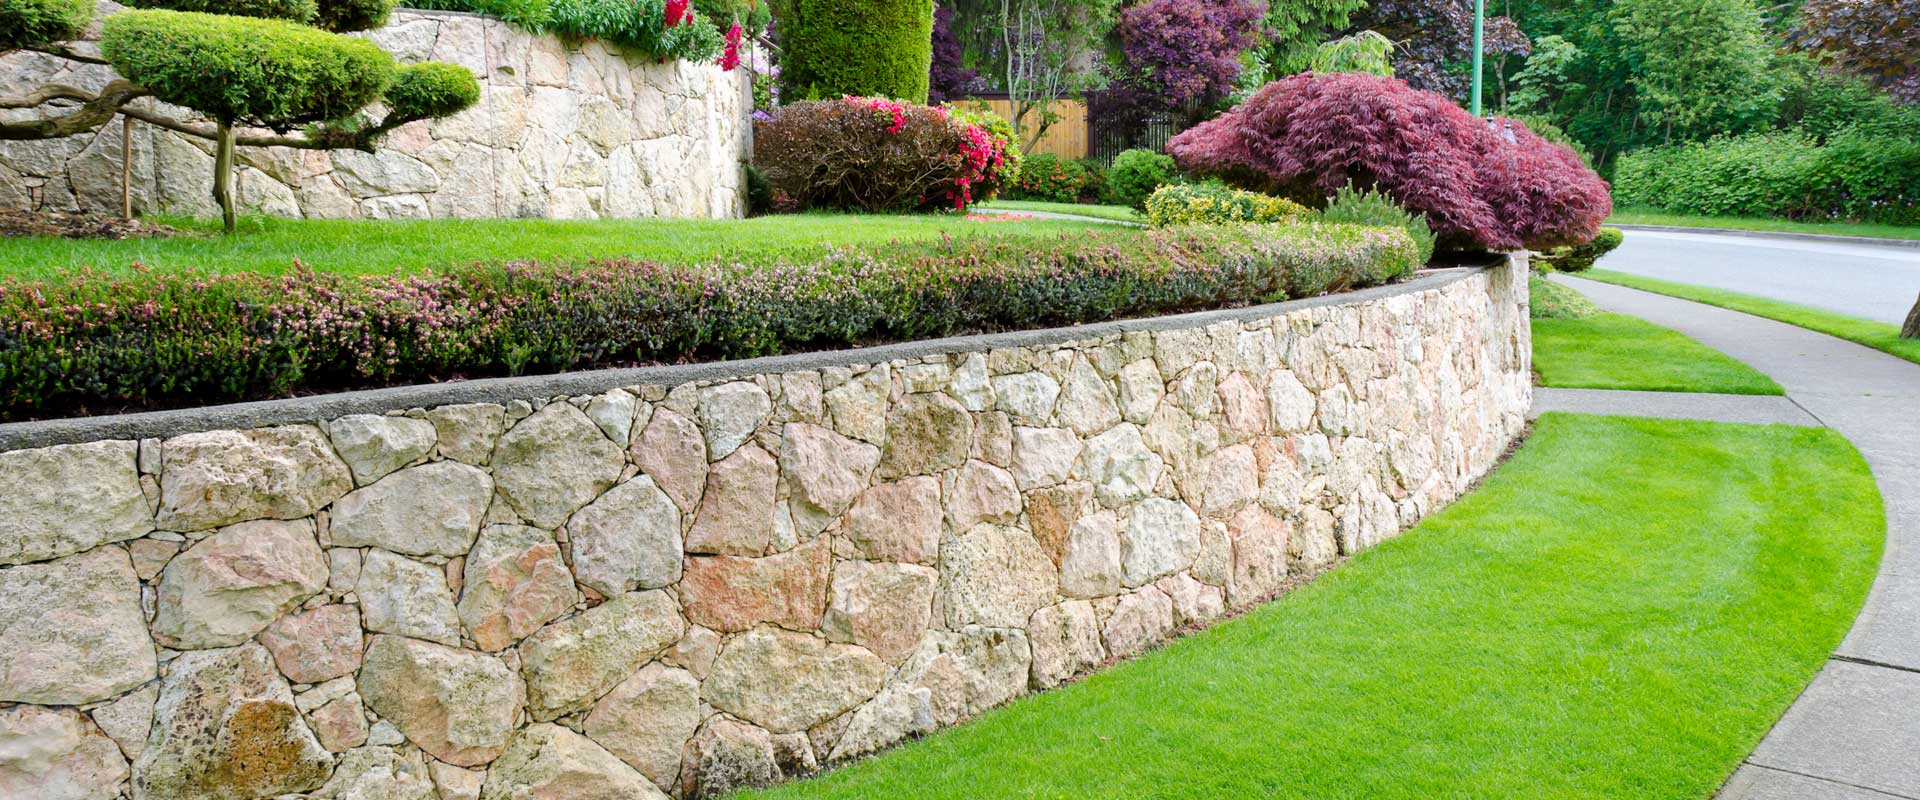 commercial lawn care, residential lawn care